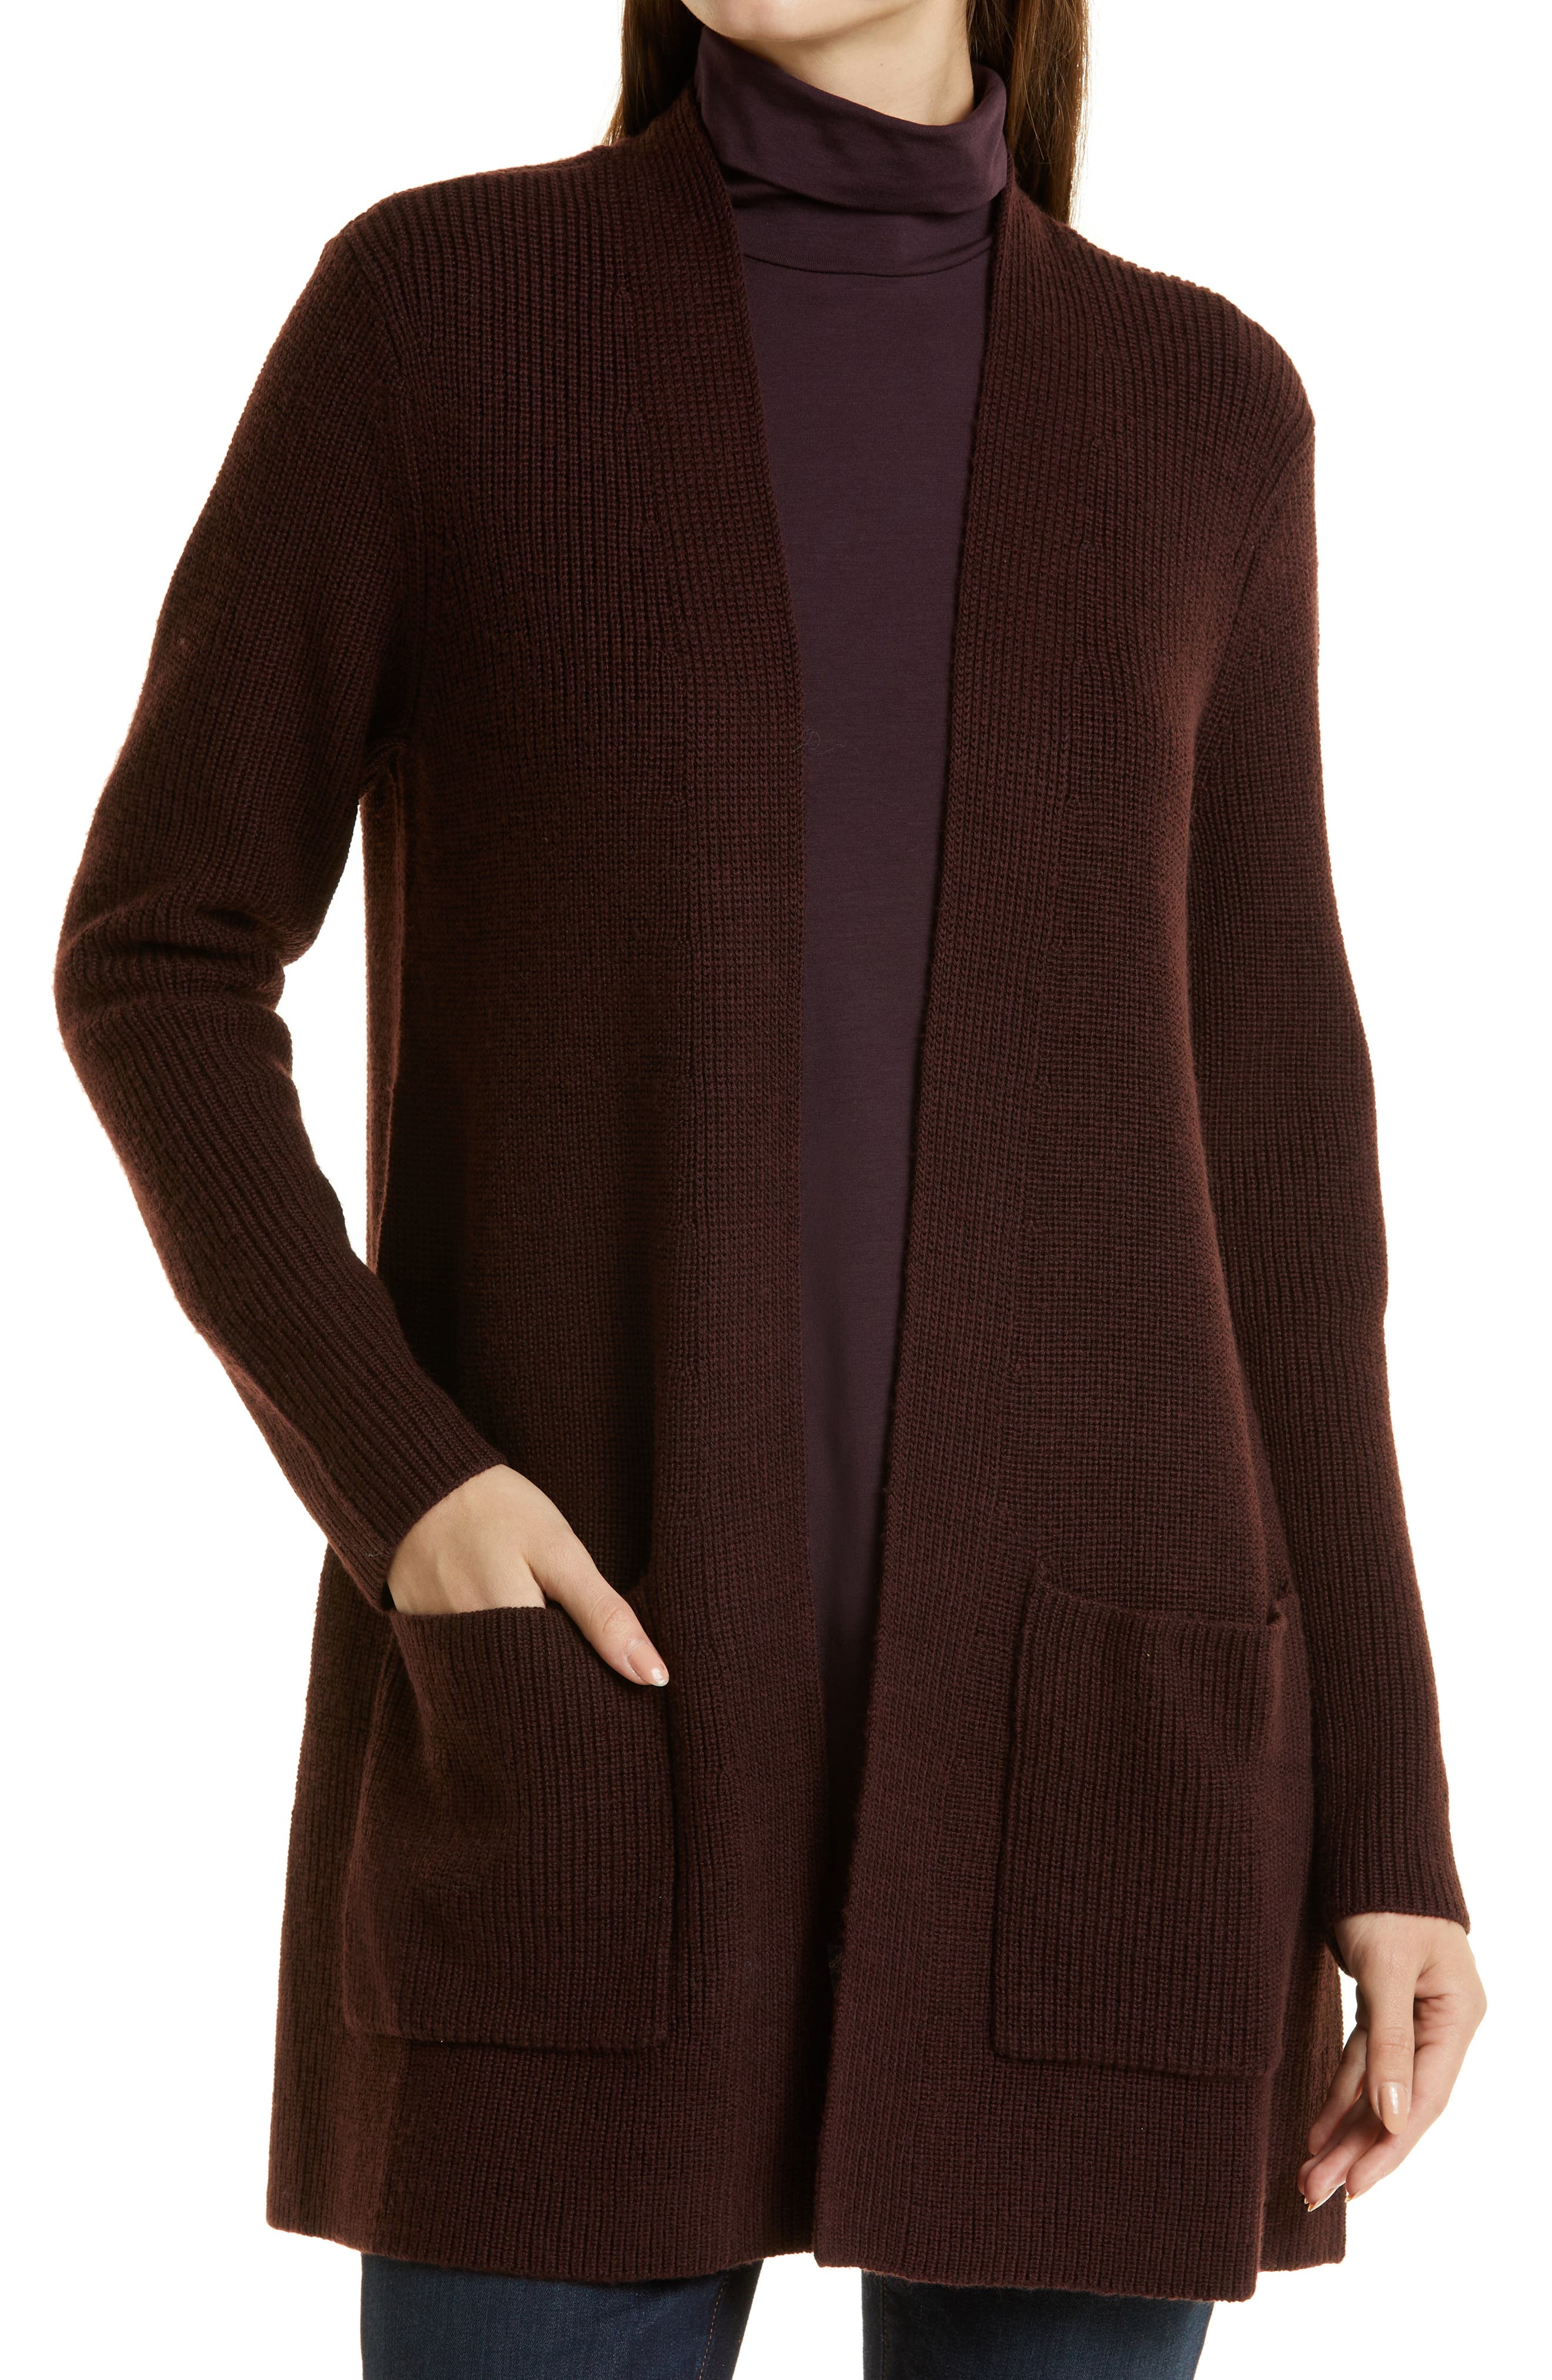 PHELEAD Womens 100% Merino Wool Winter Casual Long Sleeve Knit V-Neck Jumper Sweater Pullover 